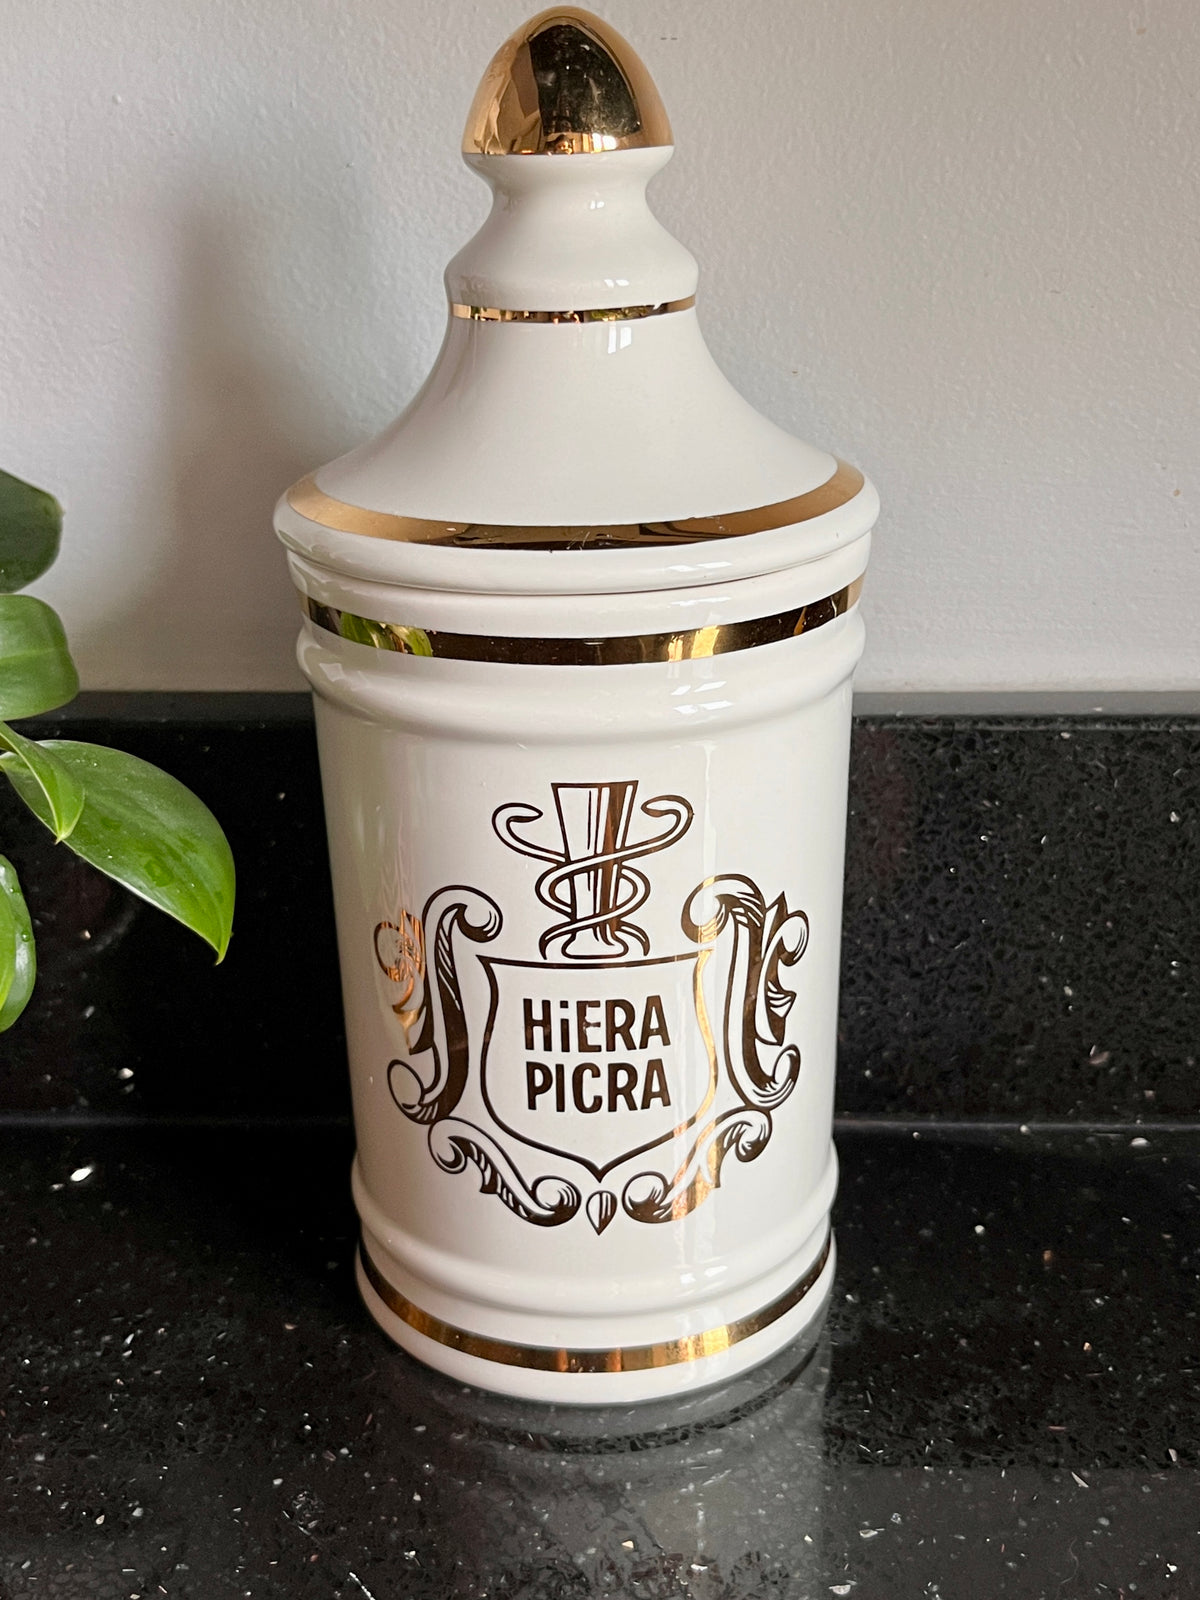 Vintage “Hiera Picra” Canister